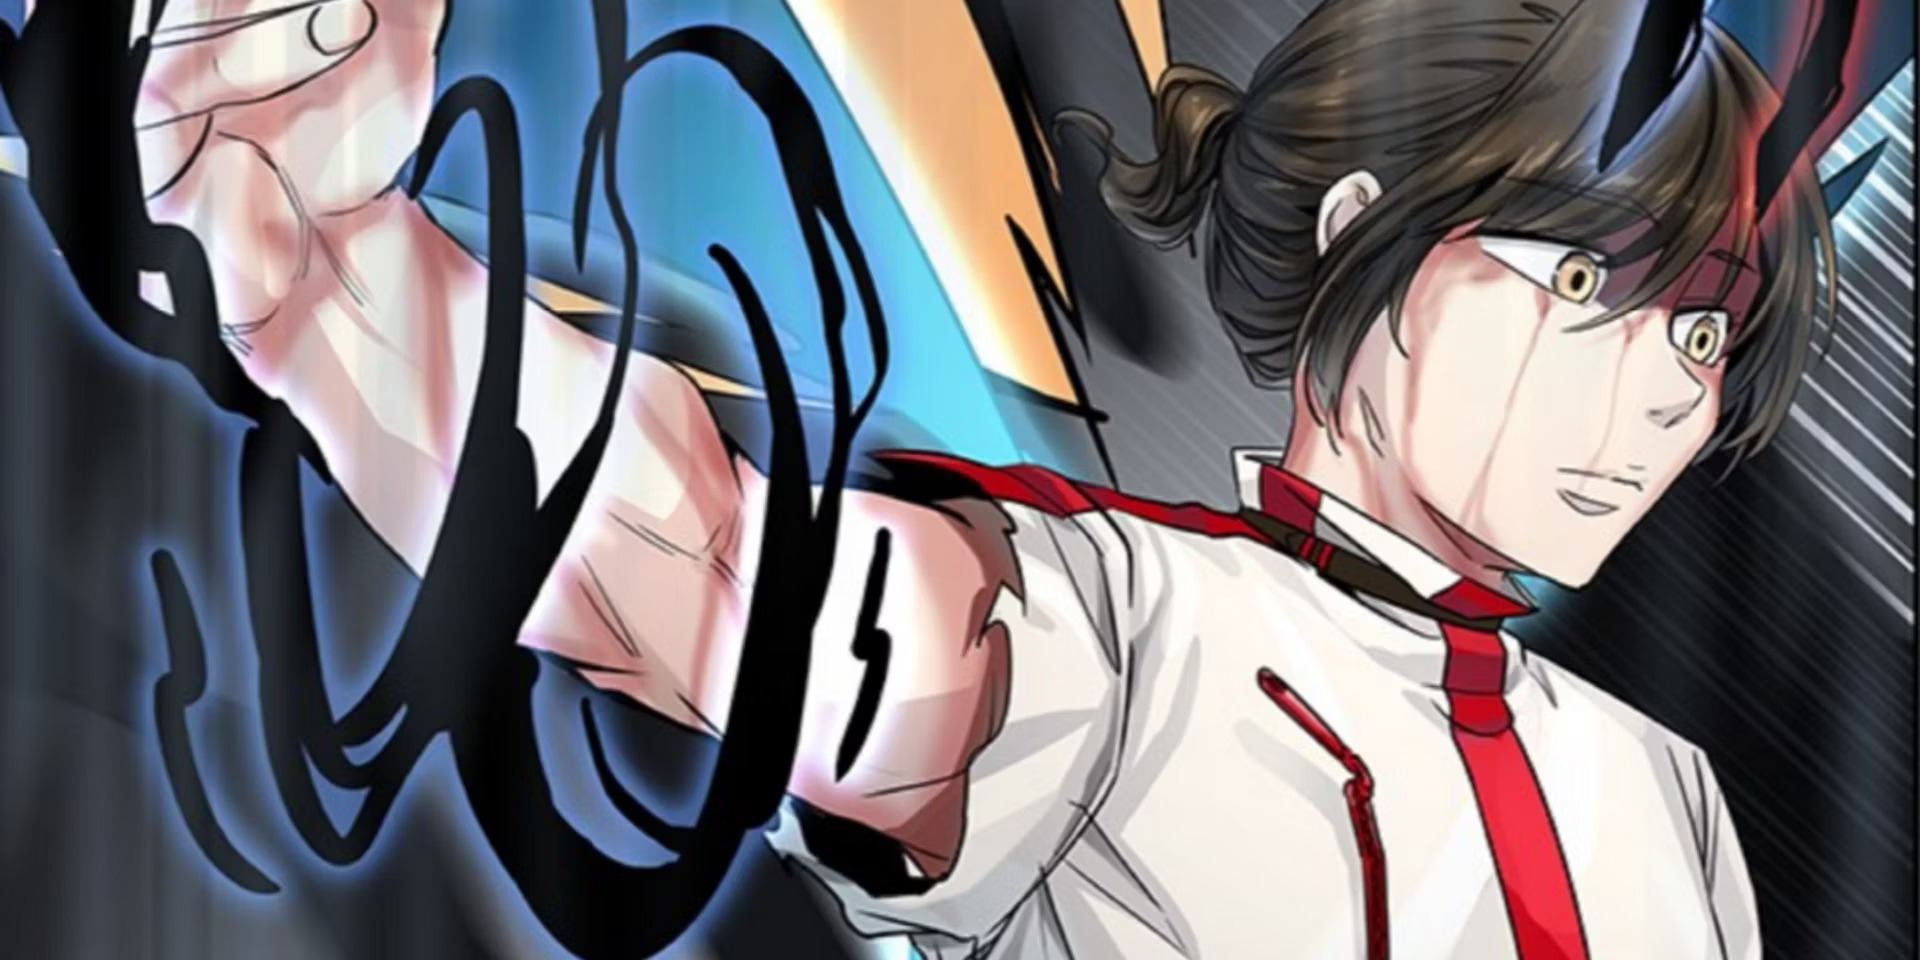 Tower Of God Manga Online - All Chapters